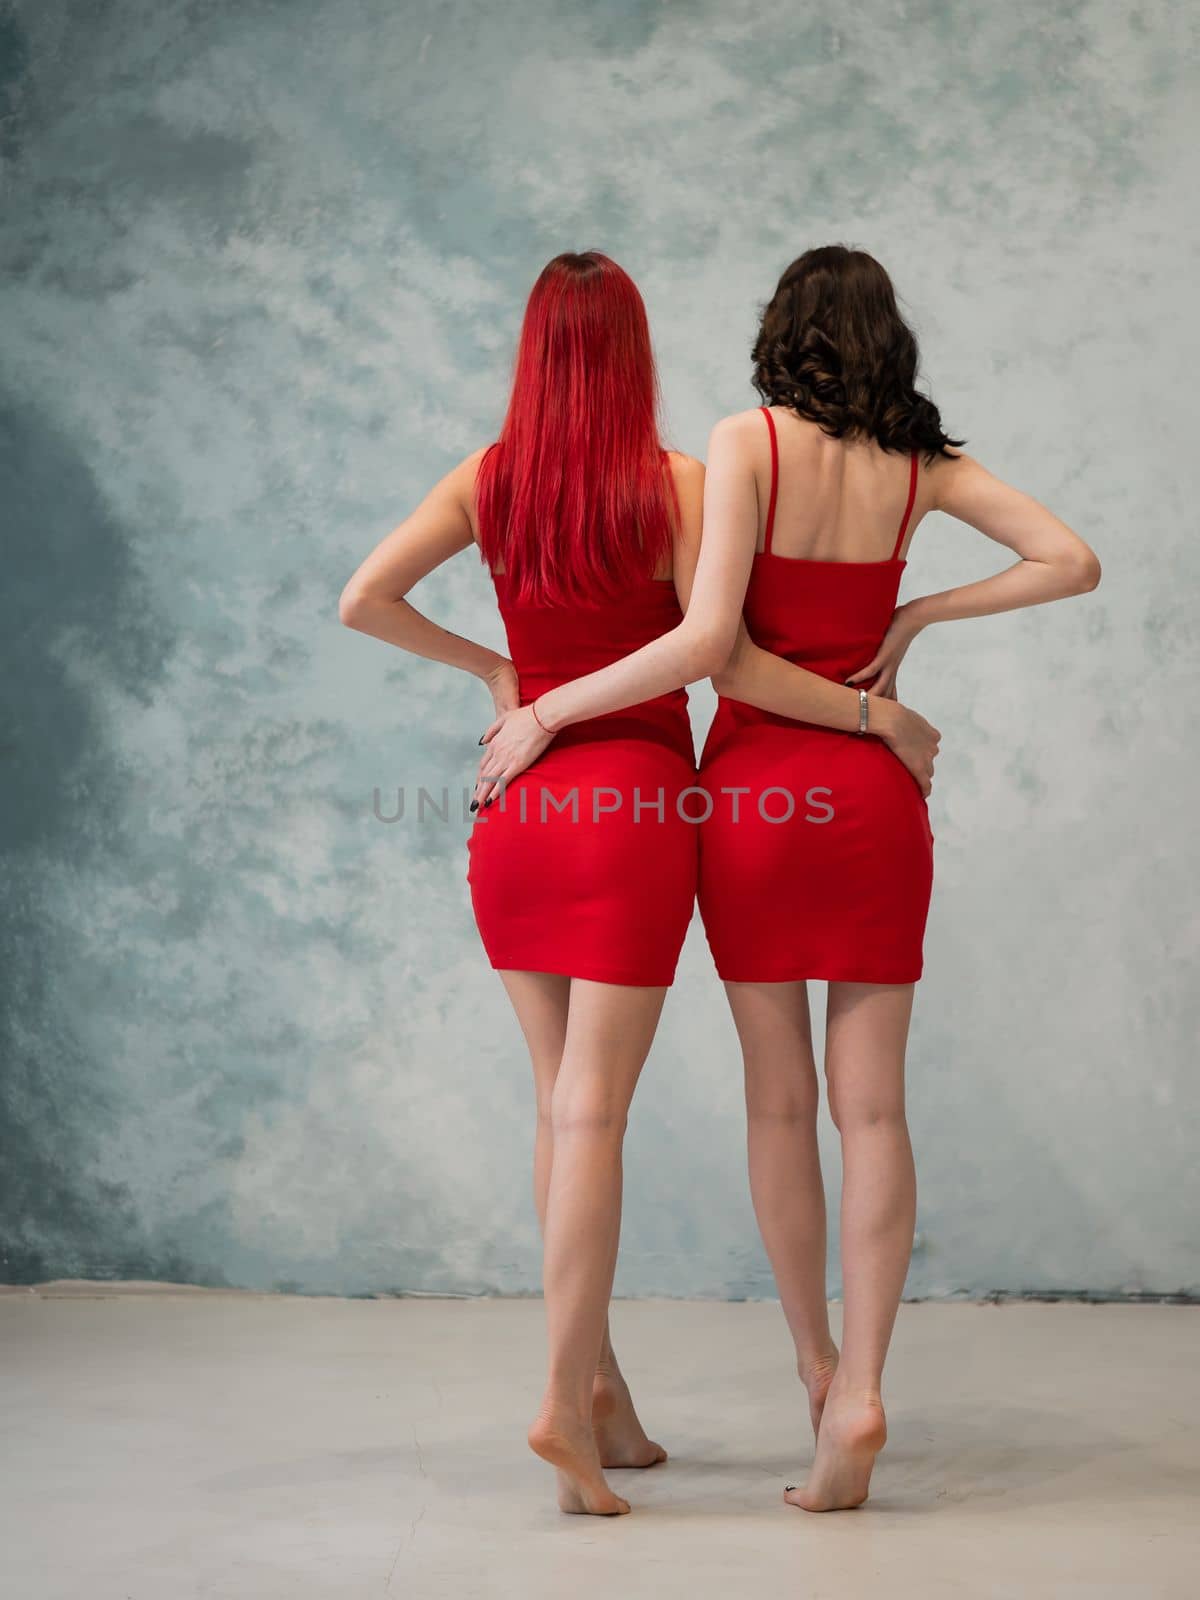 Full-length portrait of two tenderly embracing women dressed in identical red dresses. Lesbian intimacy. by mrwed54